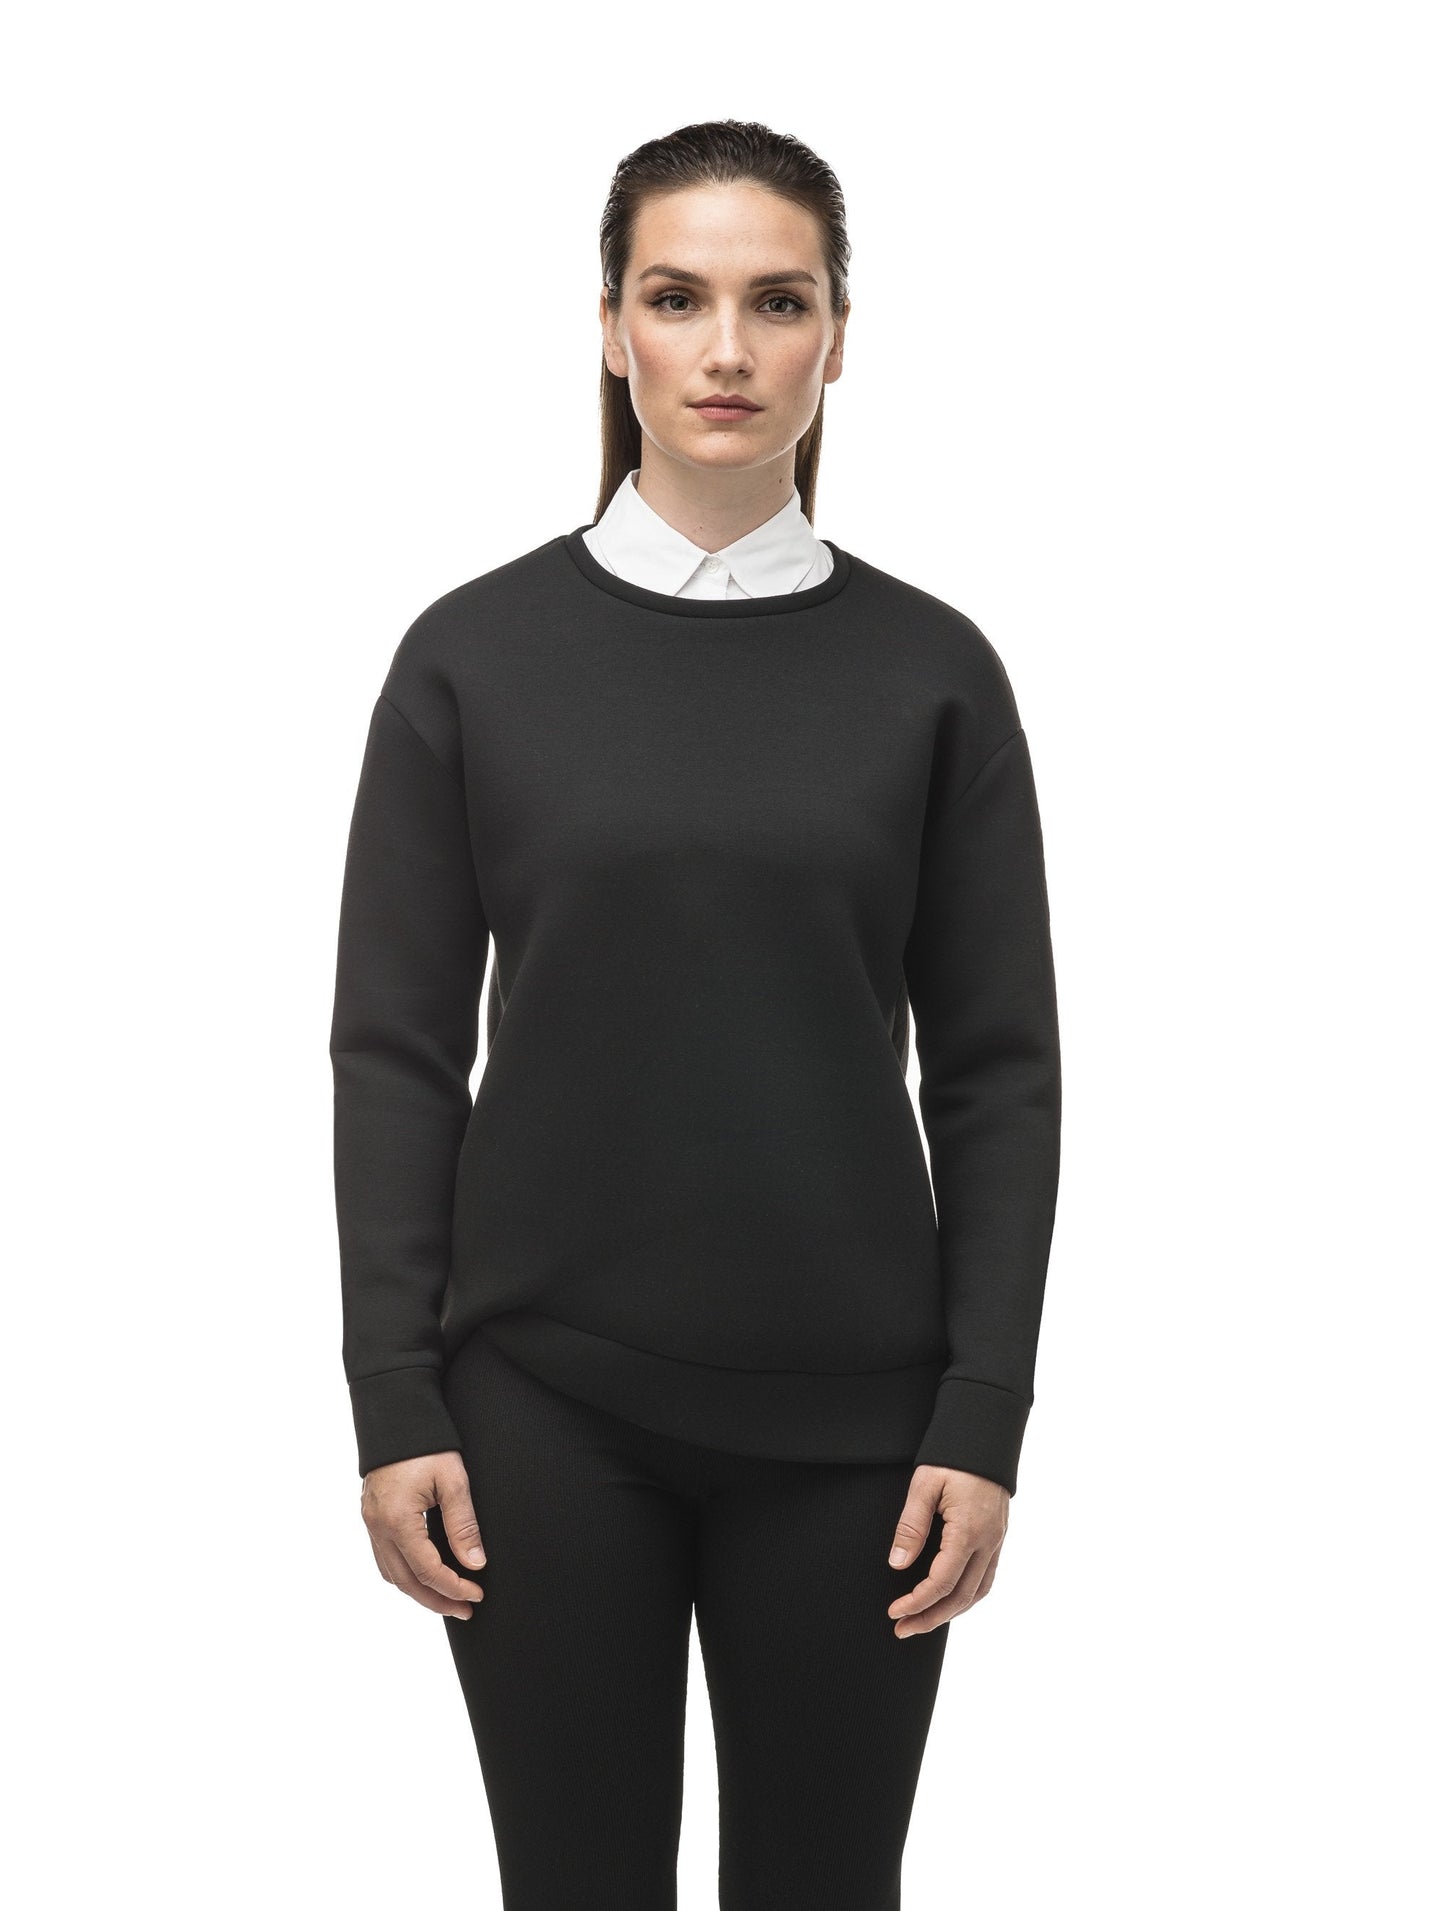 Classic black women's crew neck pullover with fold over hem detail in Black